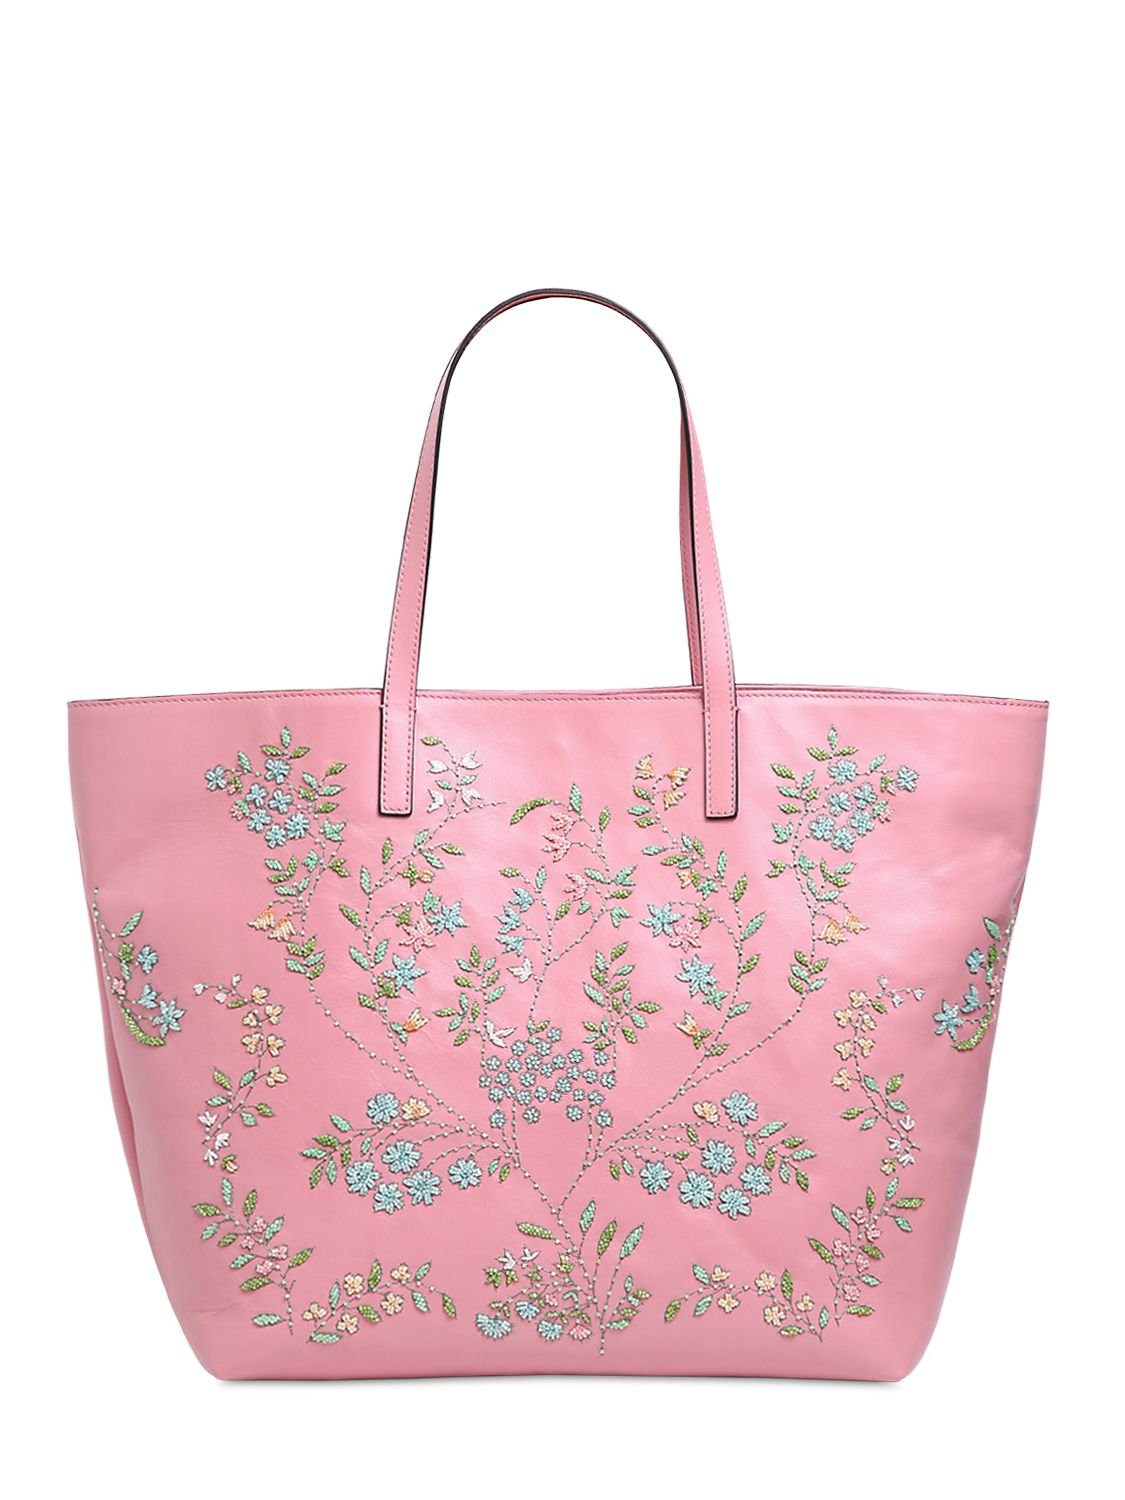 Lyst - Red Valentino Flower Embellished Leather Tote Bag in Pink